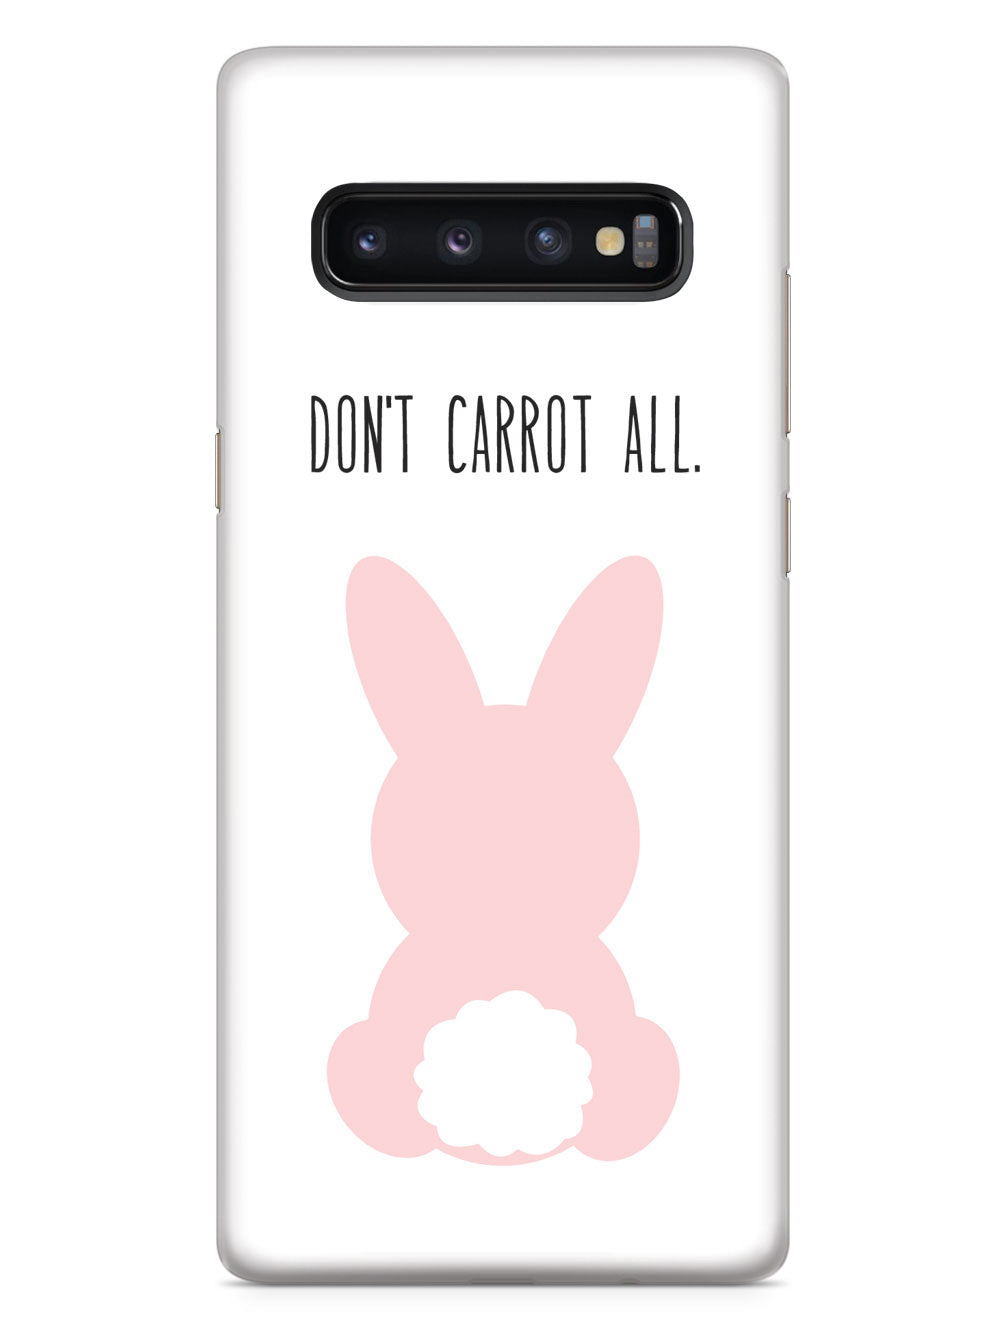 Don't Carrot All - Bunny Case